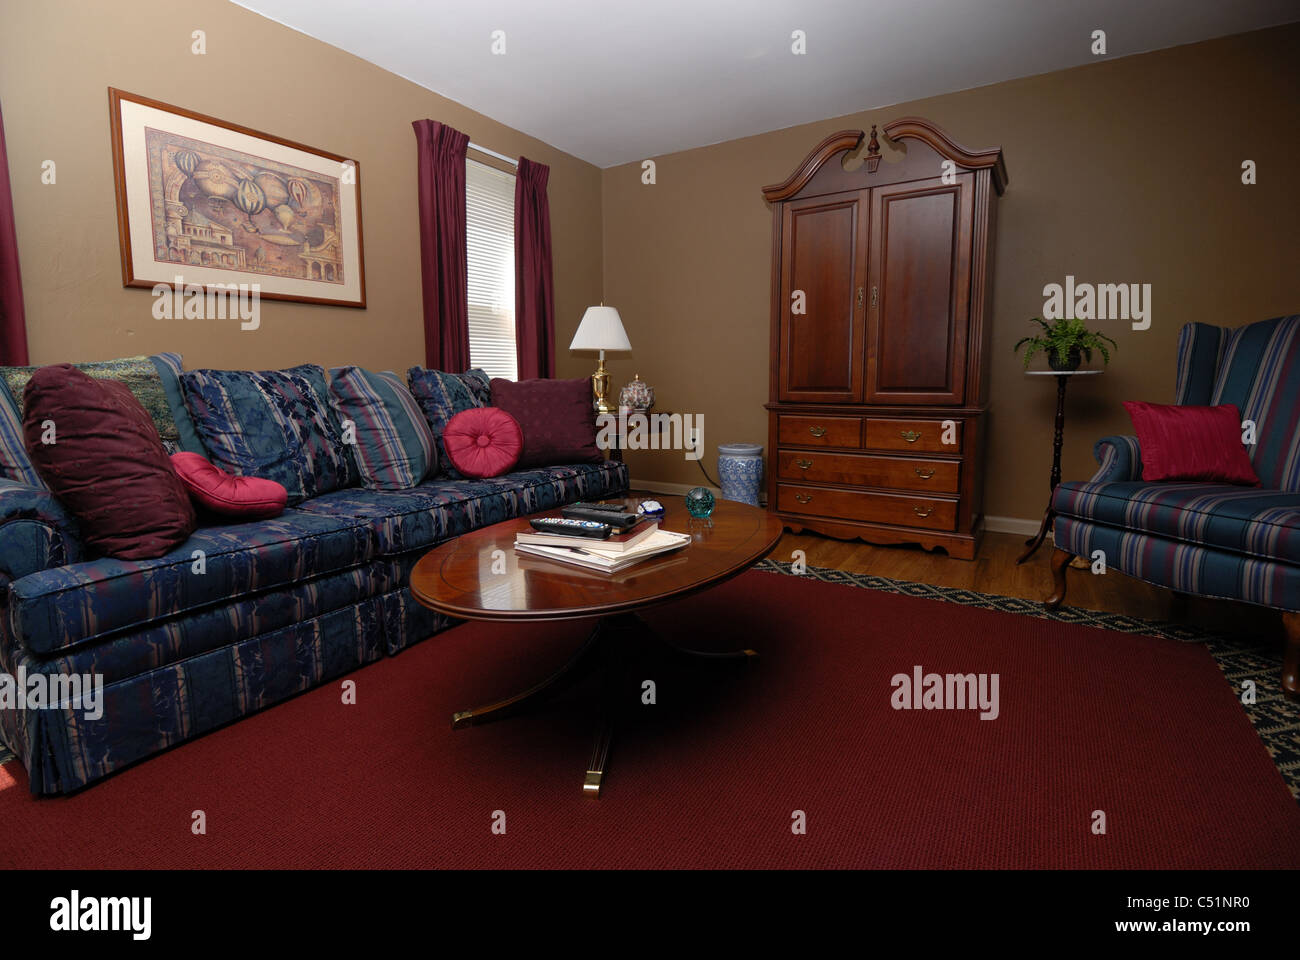 A wide angle shot of the interior of a home, a living room decorated in burgundy and blue. Stock Photo